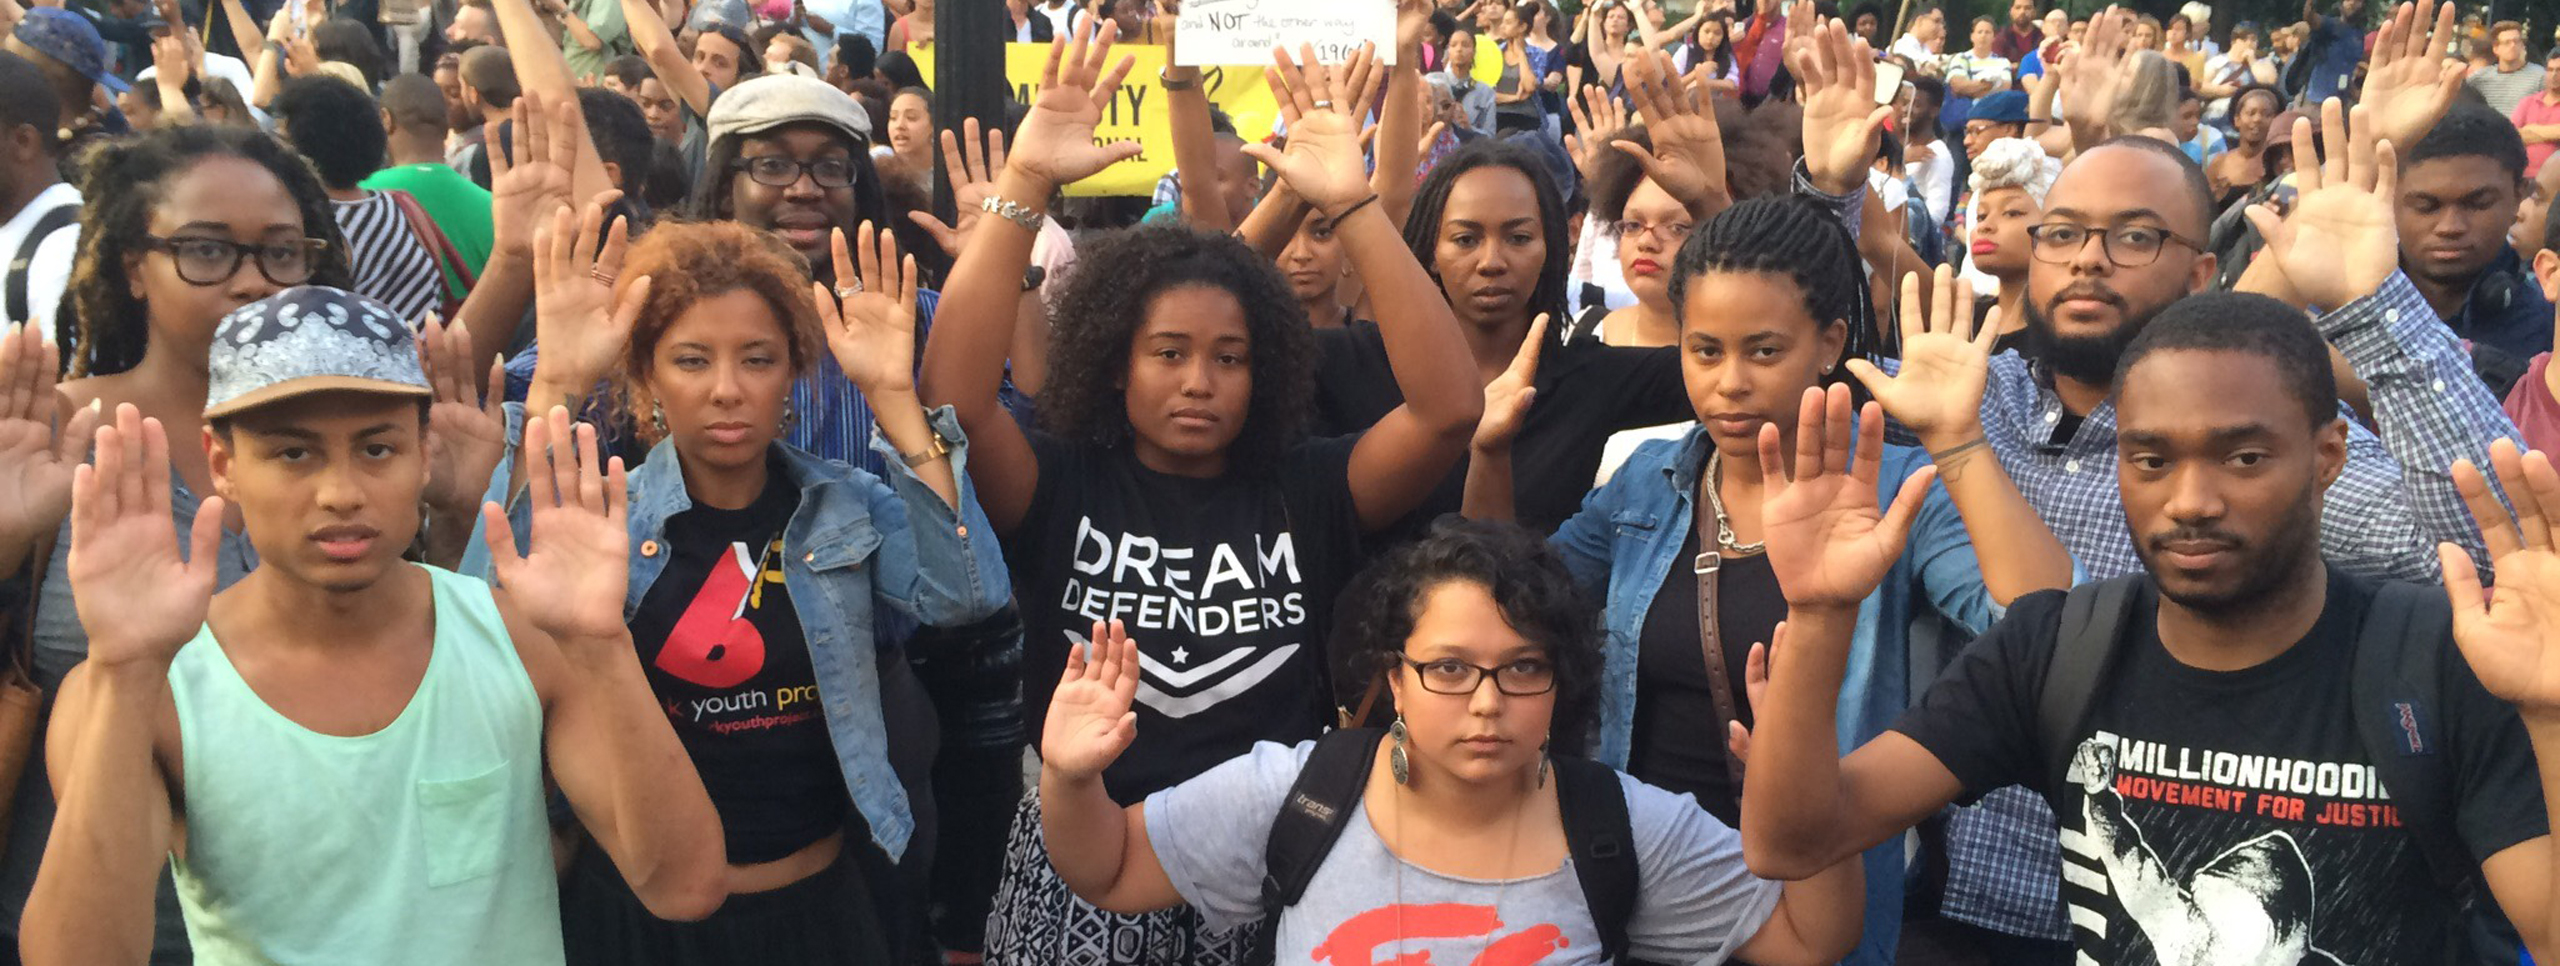 Black Lives Matter protesters with their hands in the air in a sign of surrender and the “hands up don’t shoot” slogan